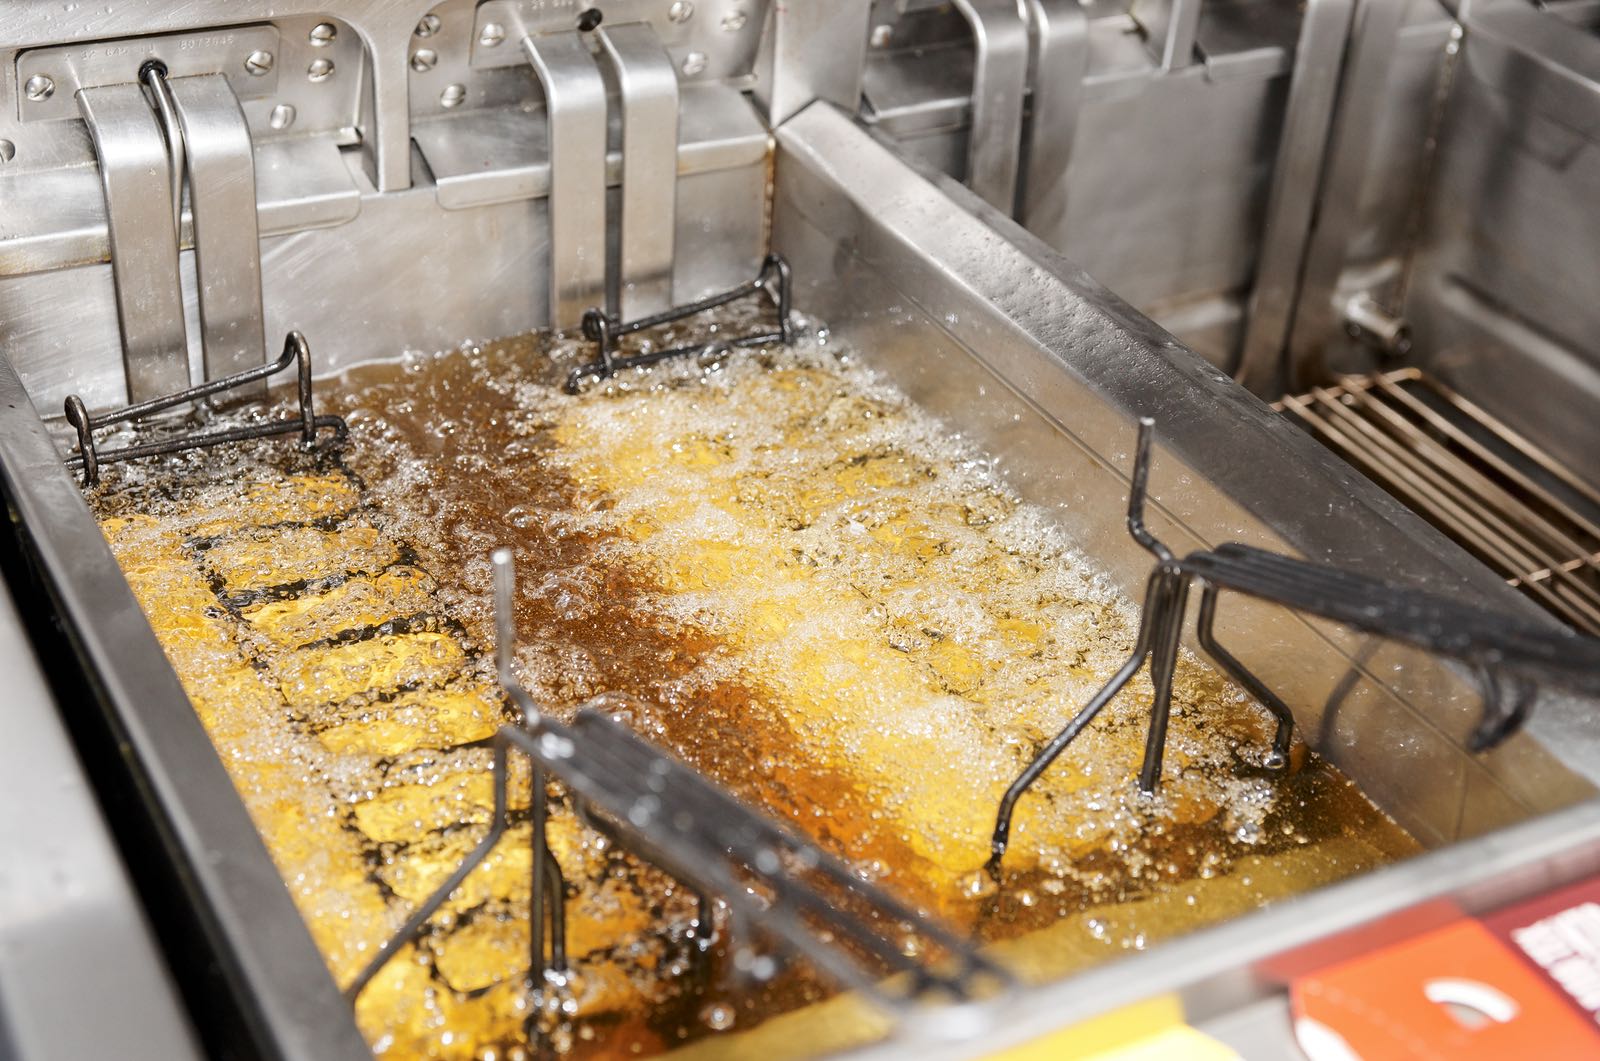 A Few Things About Grease Traps in Commercial Kitchens